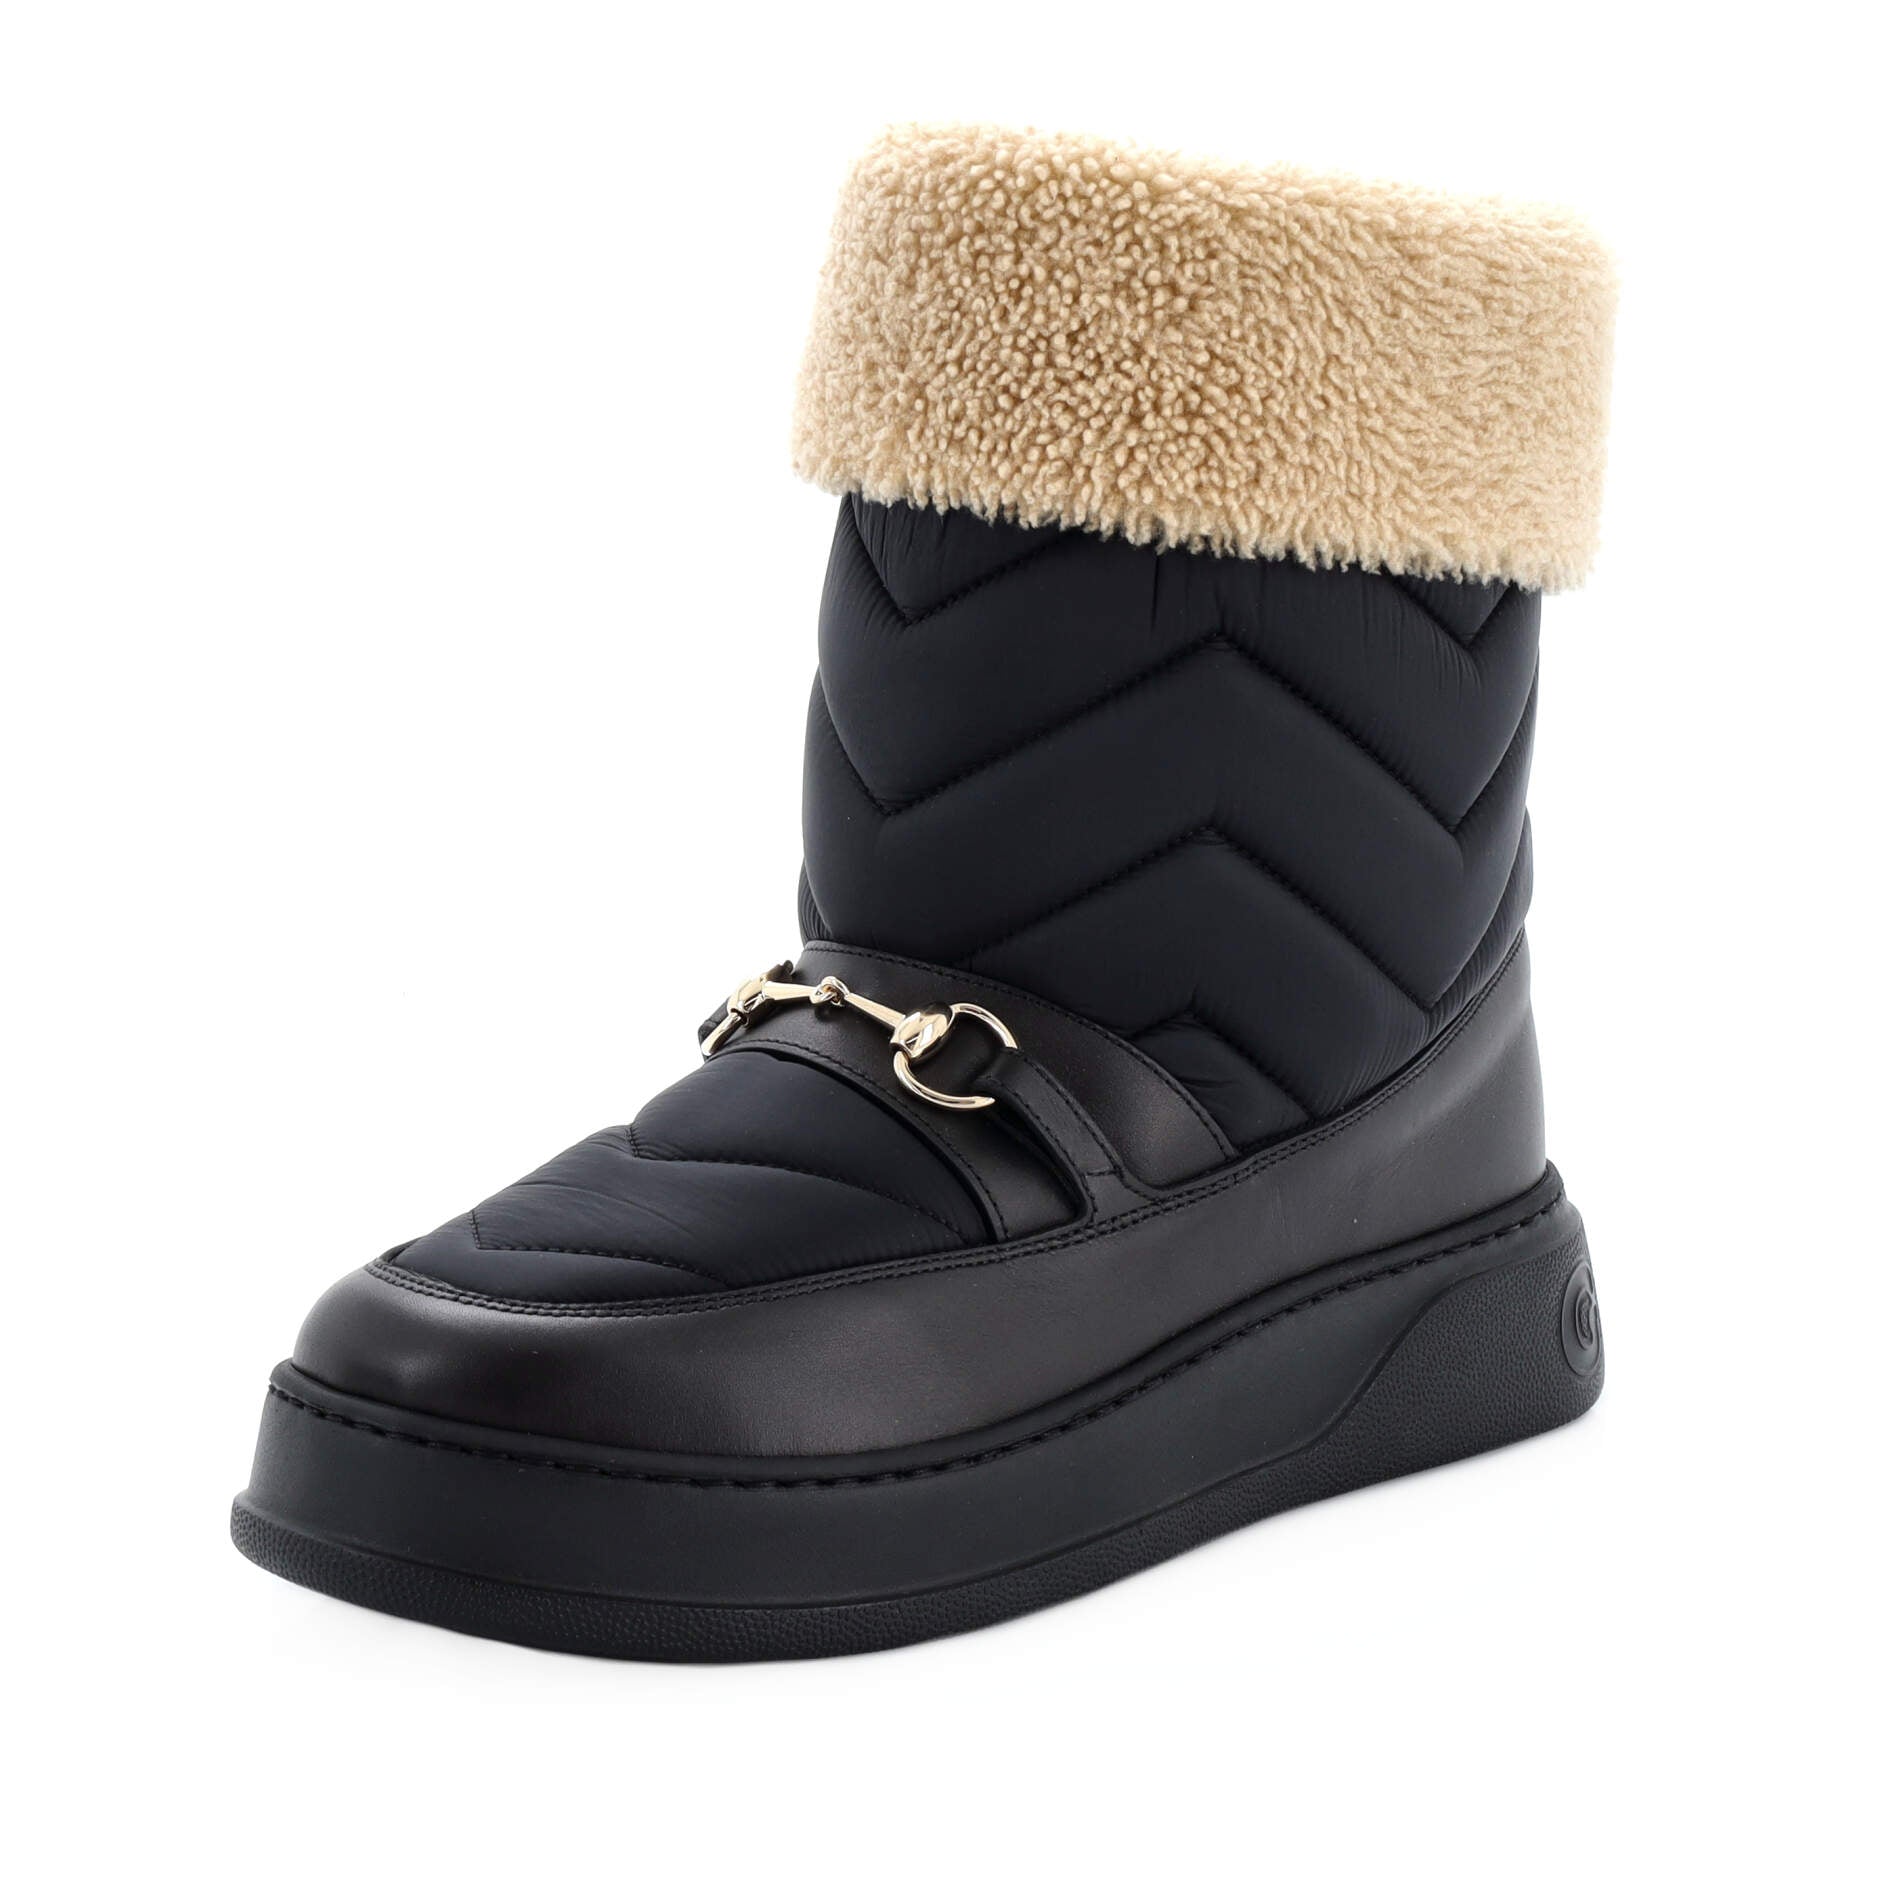 Women's Horsebit Cold Weather Flat Boots Matelasse Nylon and Leather with Shearling